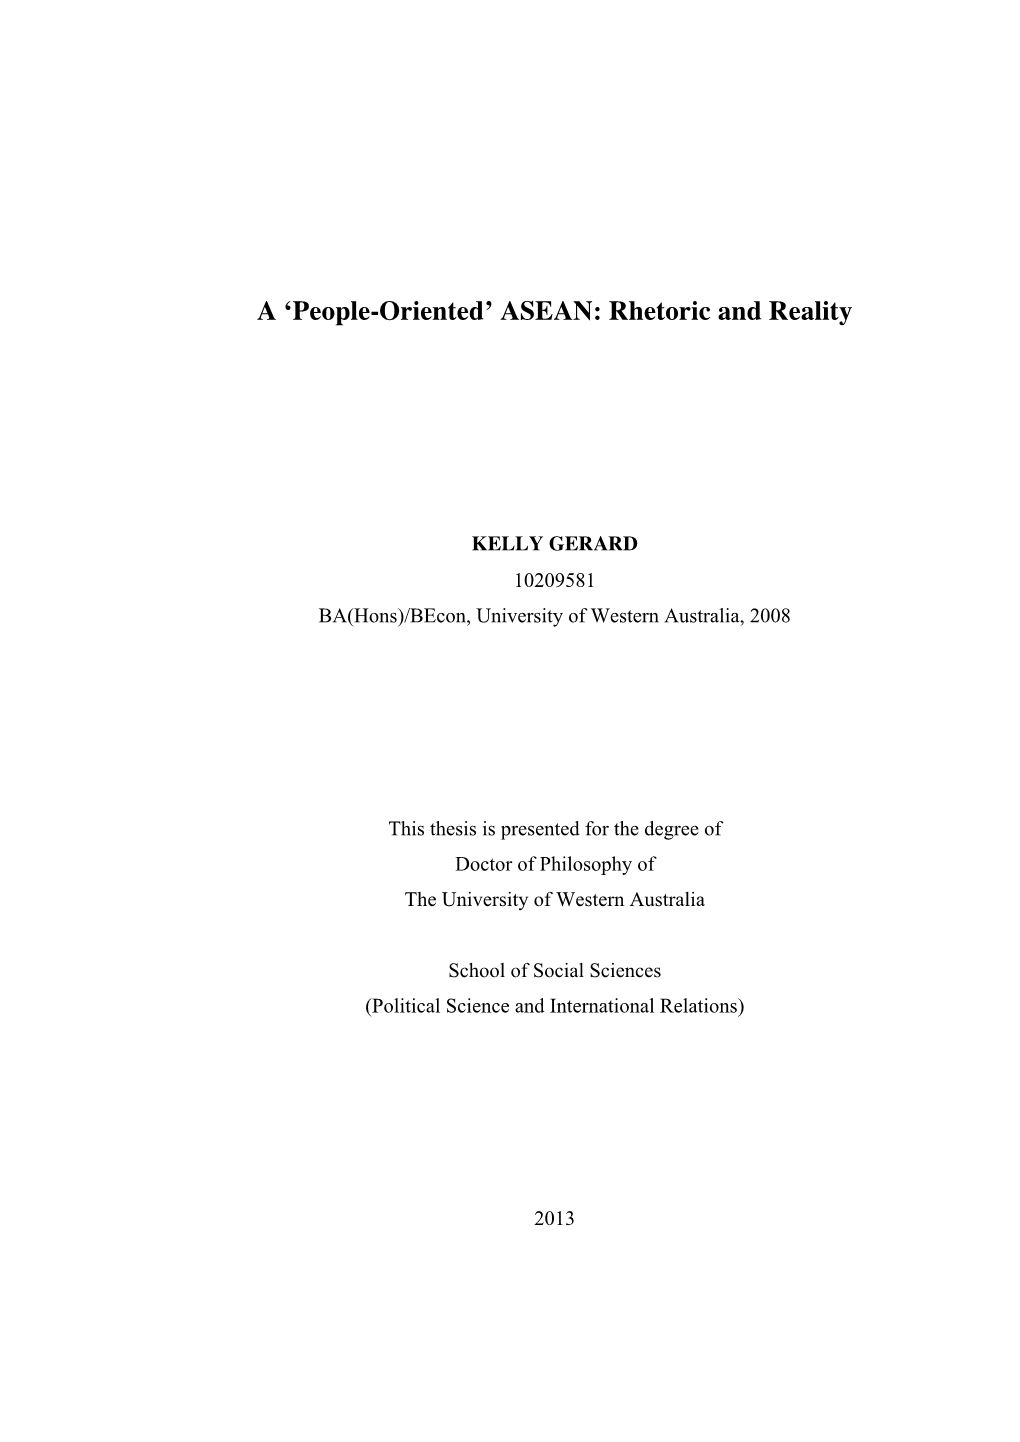 A 'People-Oriented' ASEAN: Rhetoric and Reality